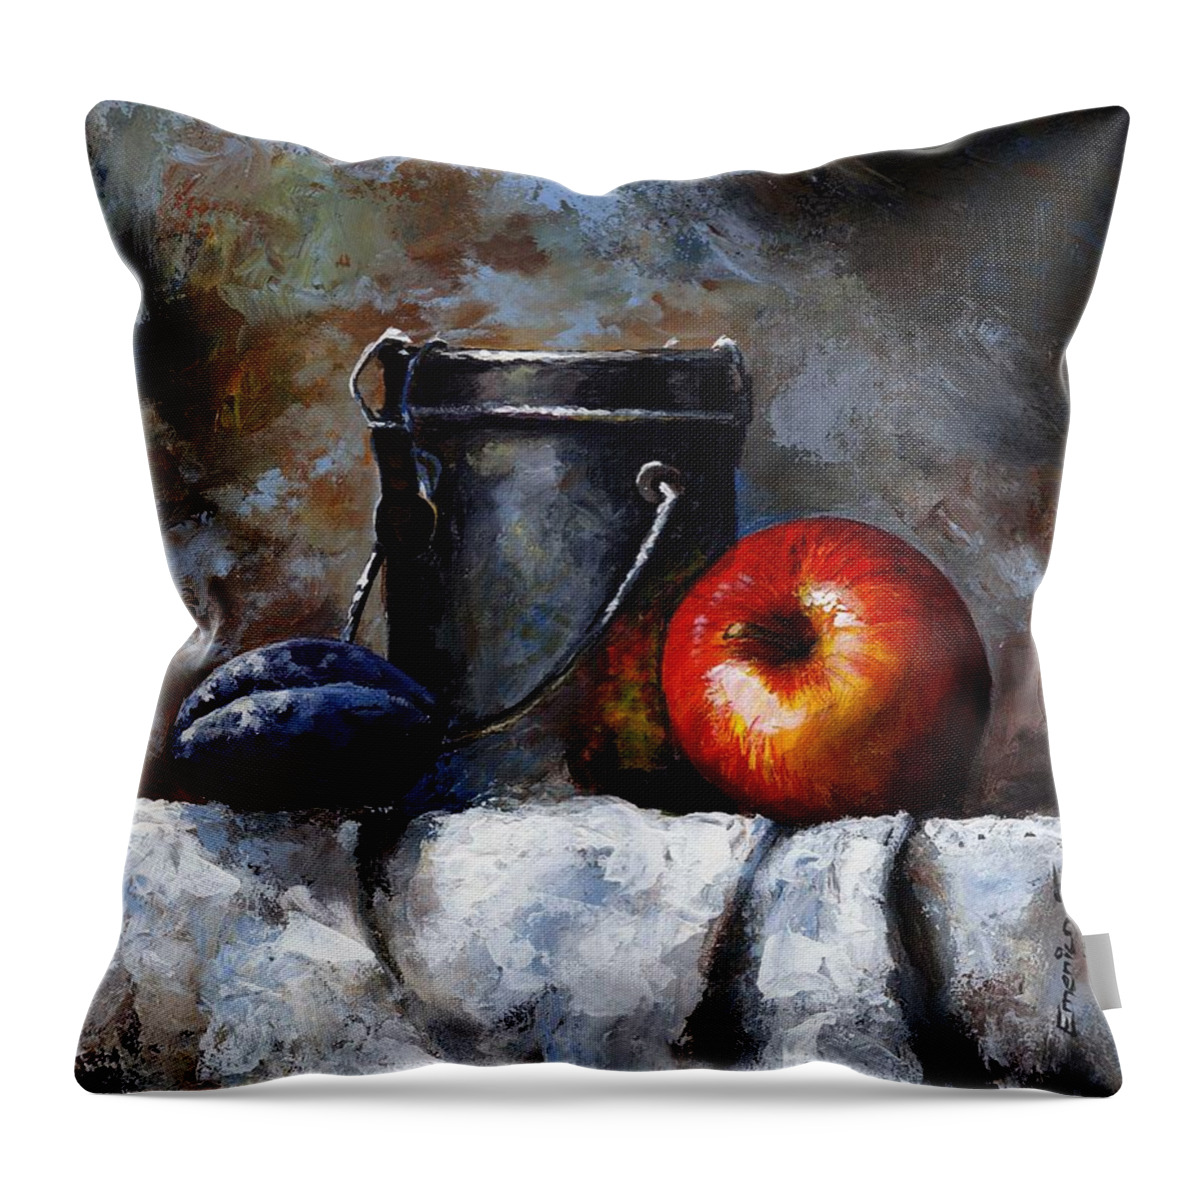 Still Life Throw Pillow featuring the painting Still Life 10 by Emerico Imre Toth